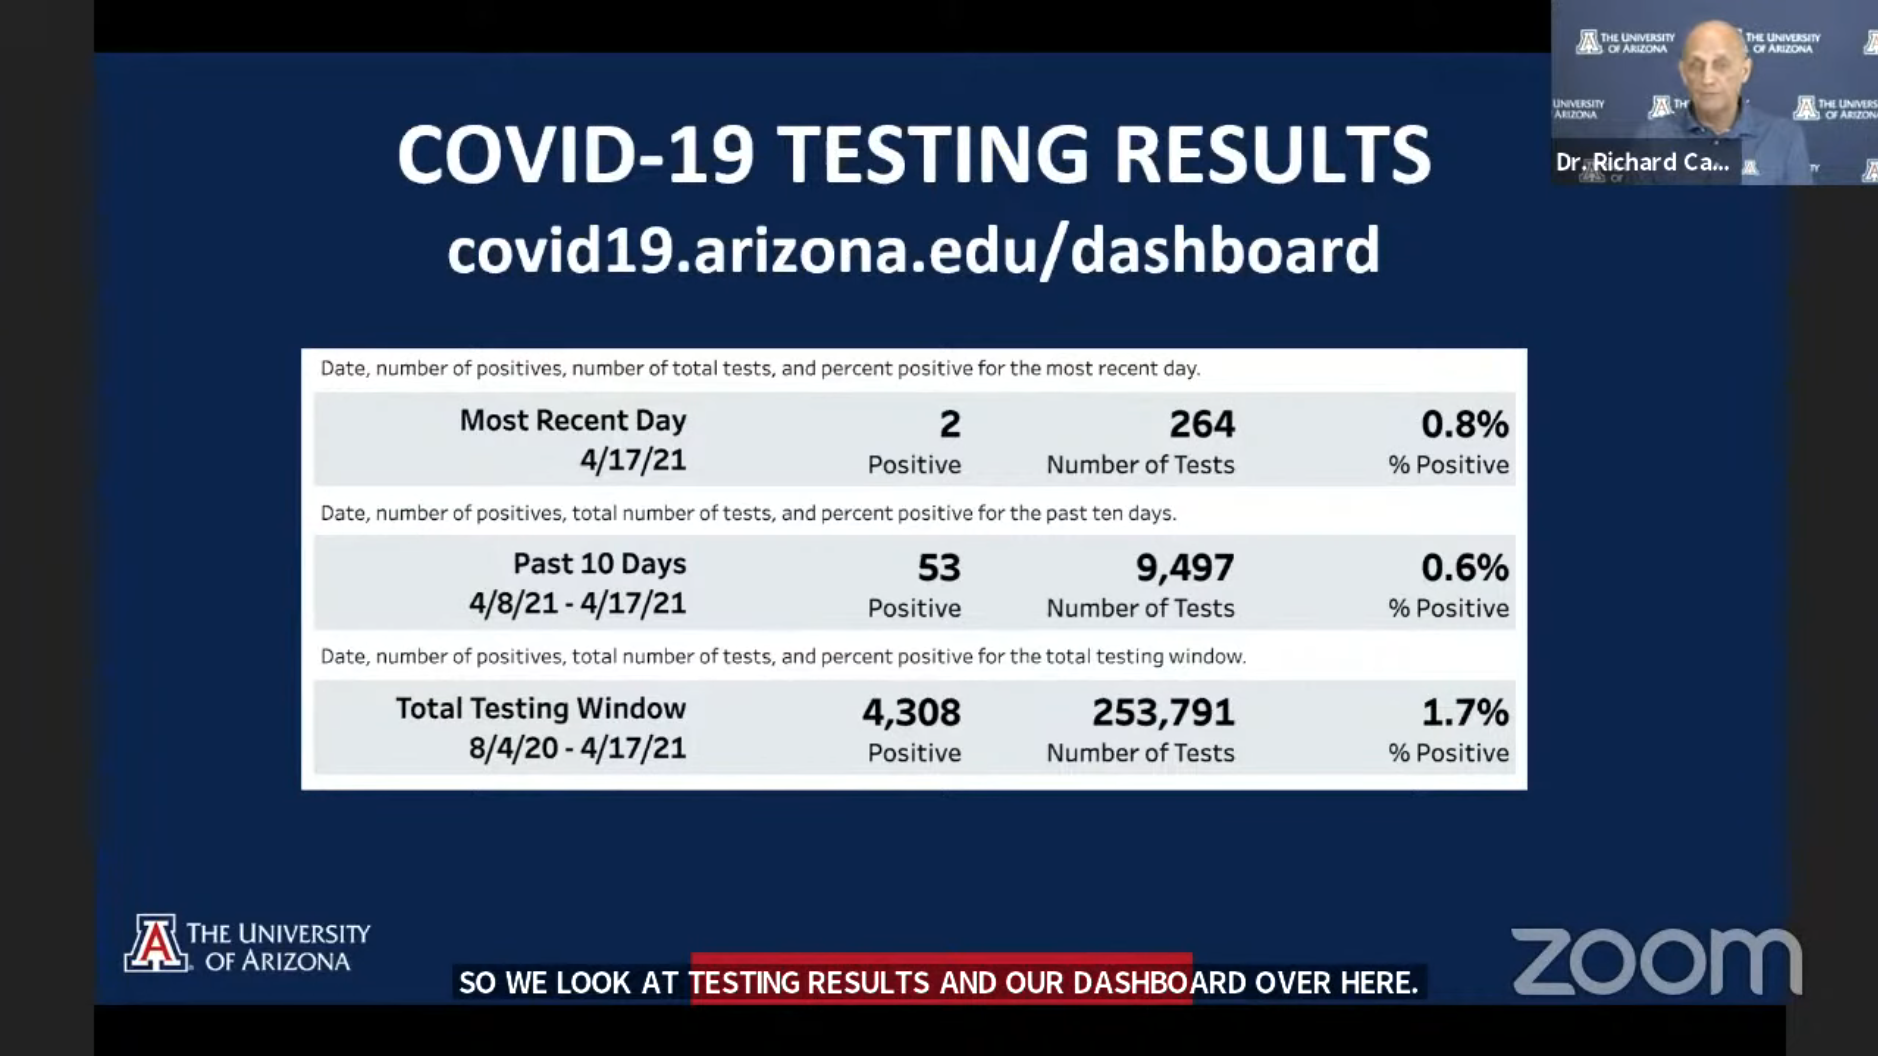 Screenshot of COVID-19 testing results from the UA, indicating a 0.6% positivity rate from April 8 to April 17.